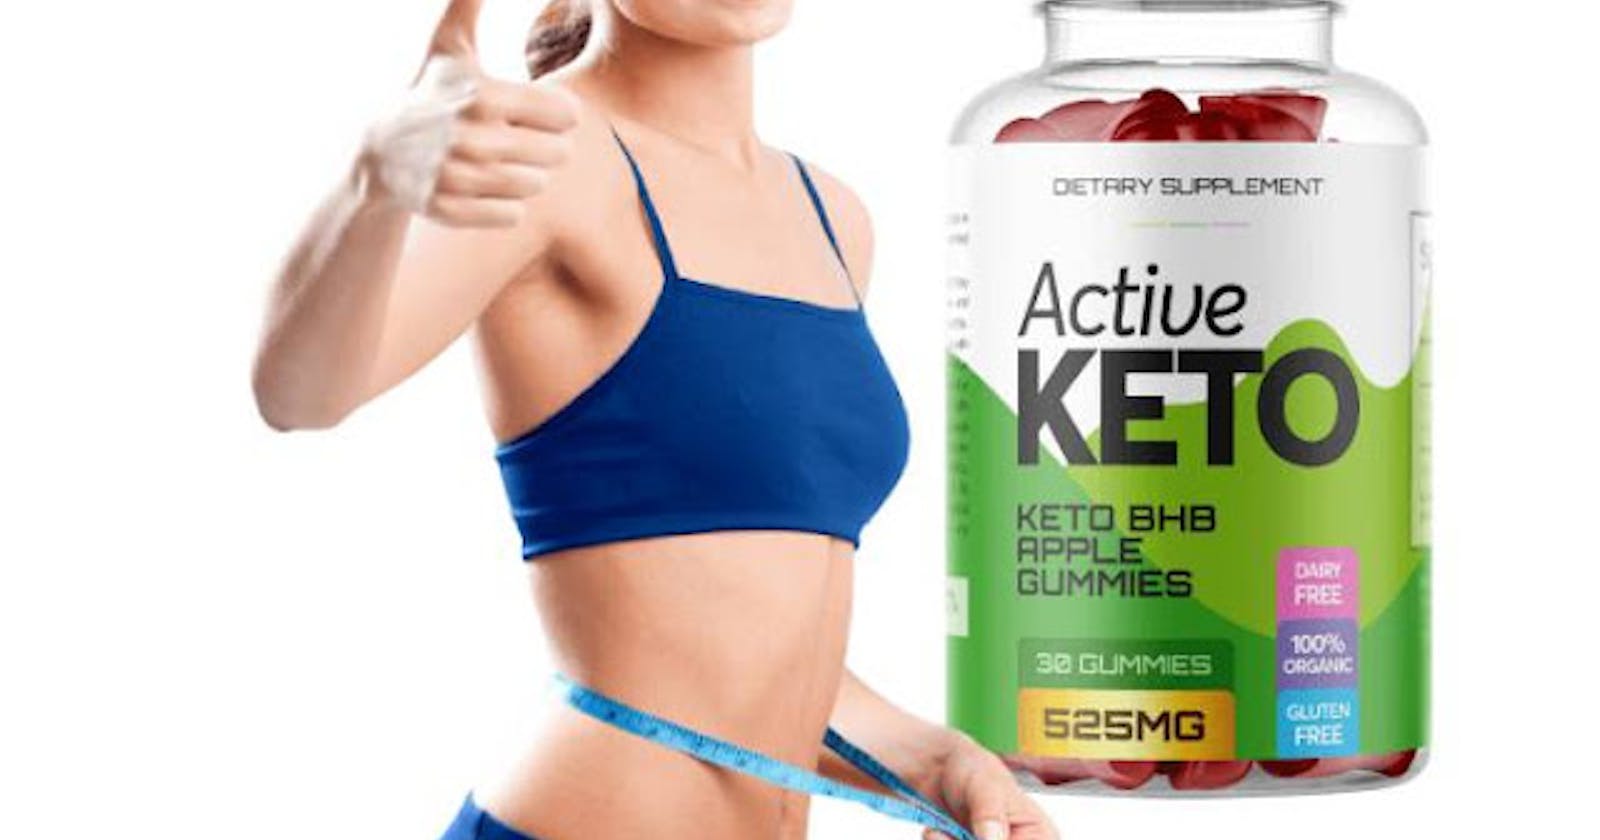 Stay on Track with Jock Zonfrillo's Ketogenic Gummies